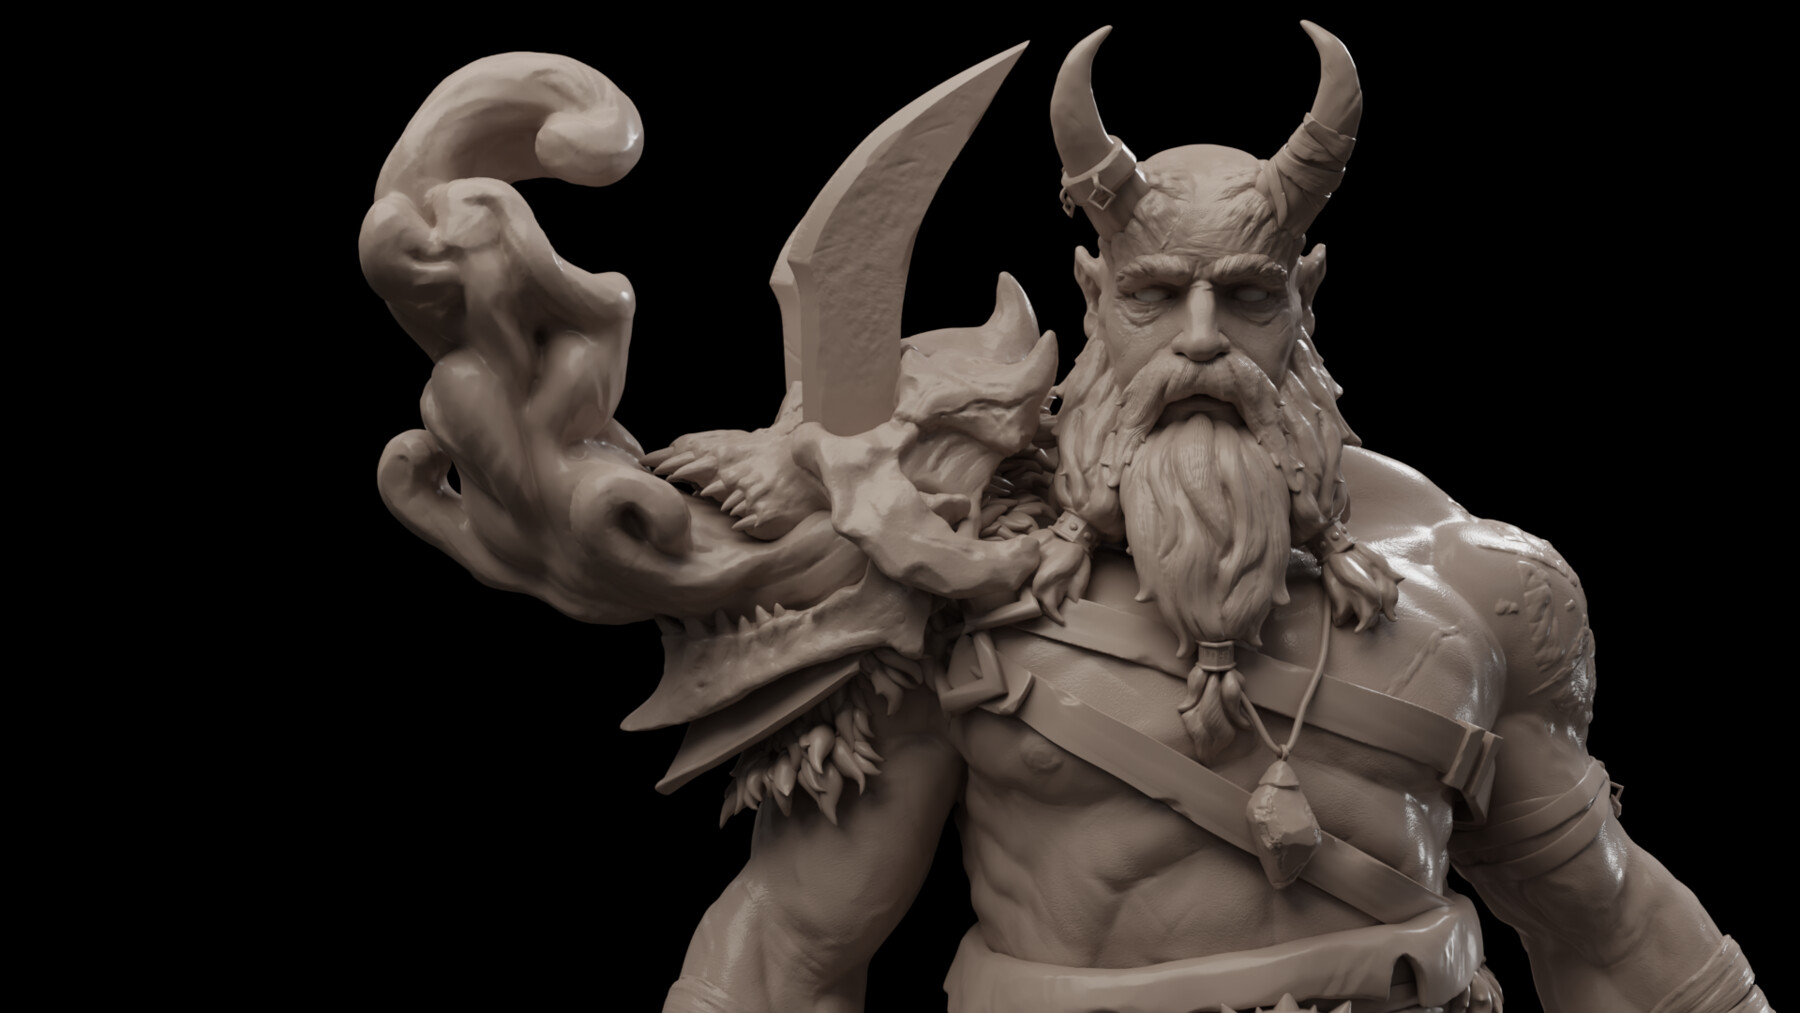 getting into the character art industry zbrush